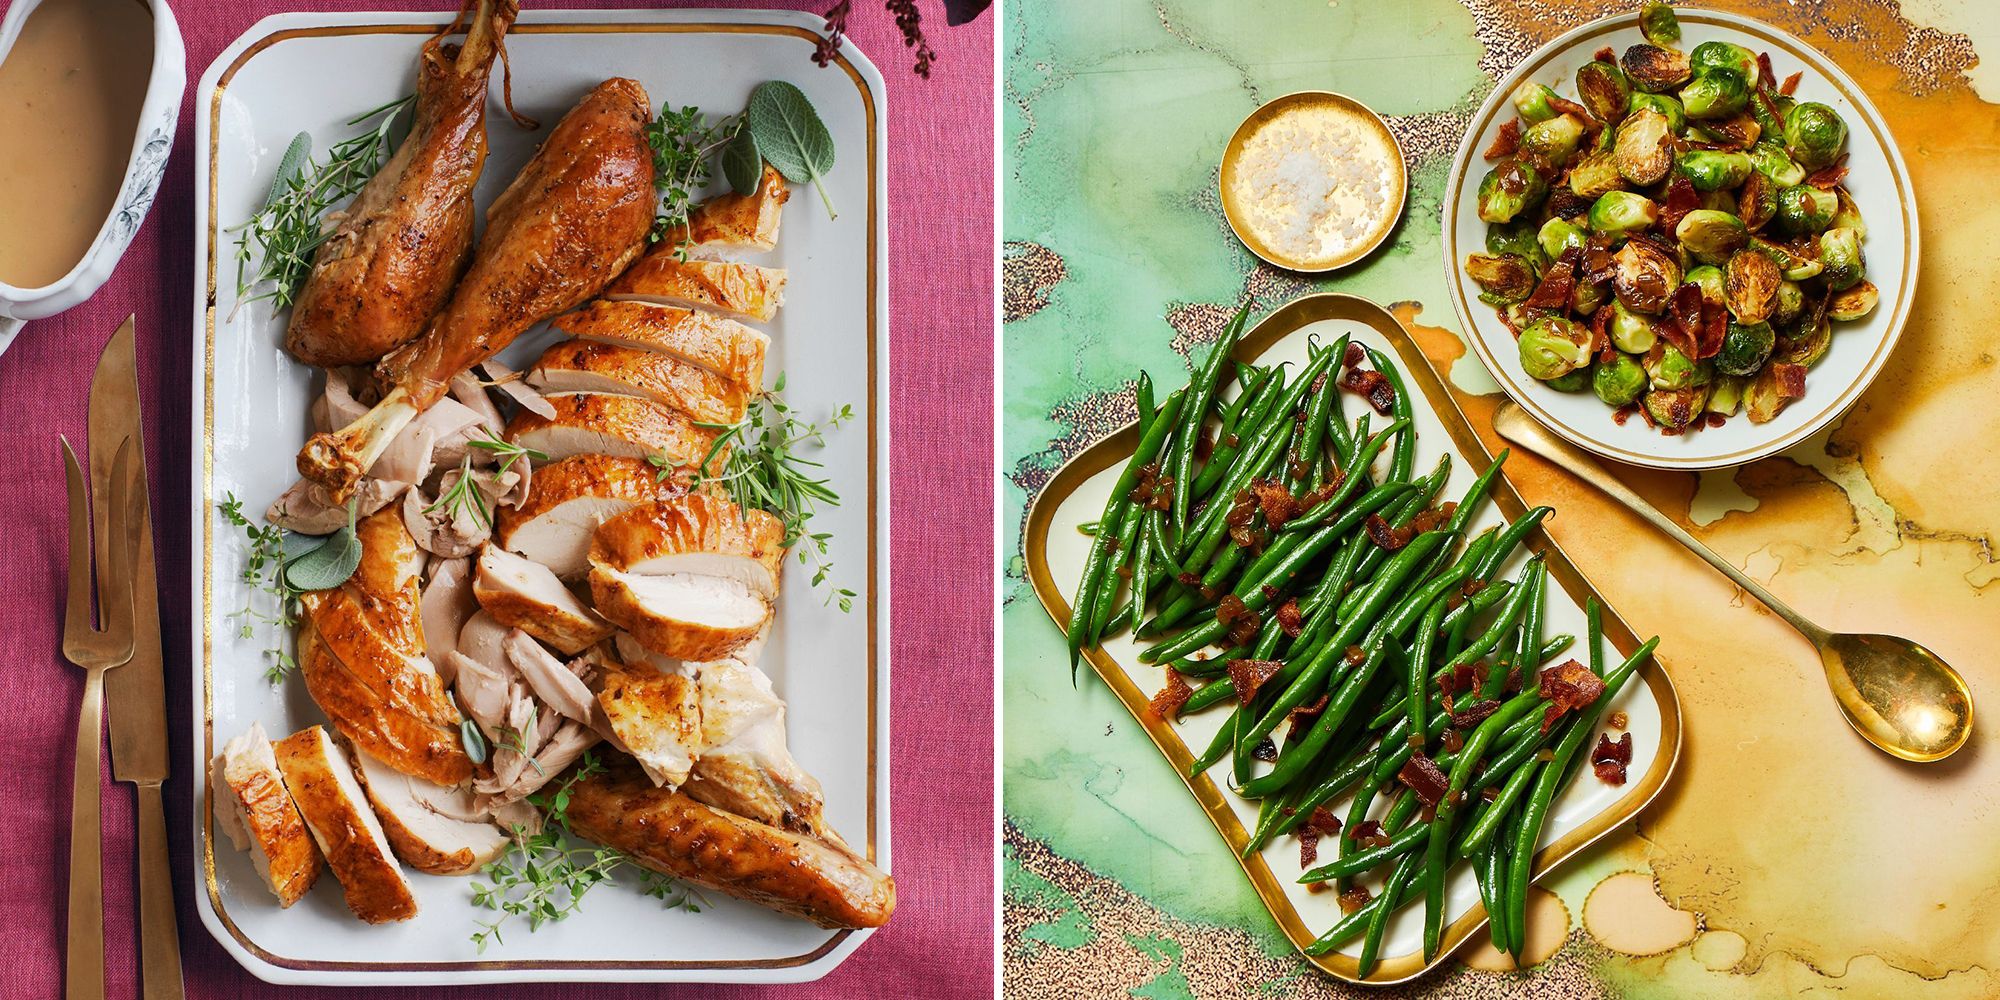 Untraditional Christmas Meals : 19 Christmas Dinners From Around The World / This year, jazz up your christmas dinner spread with something different.